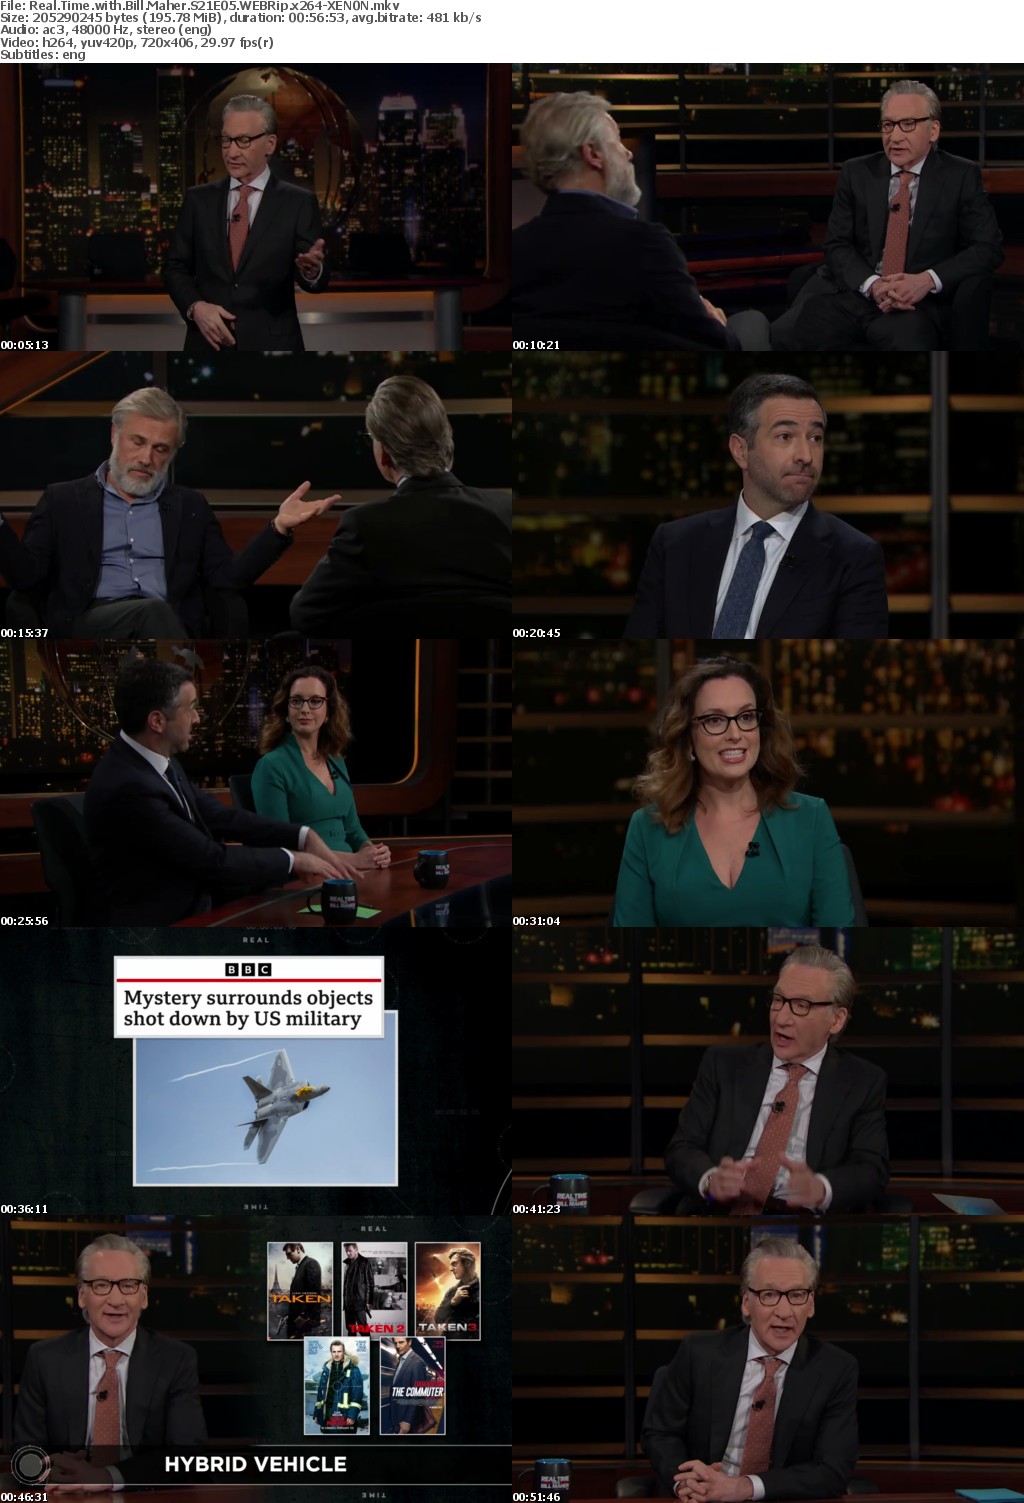 Real Time with Bill Maher S21E05 WEBRip x264-XEN0N